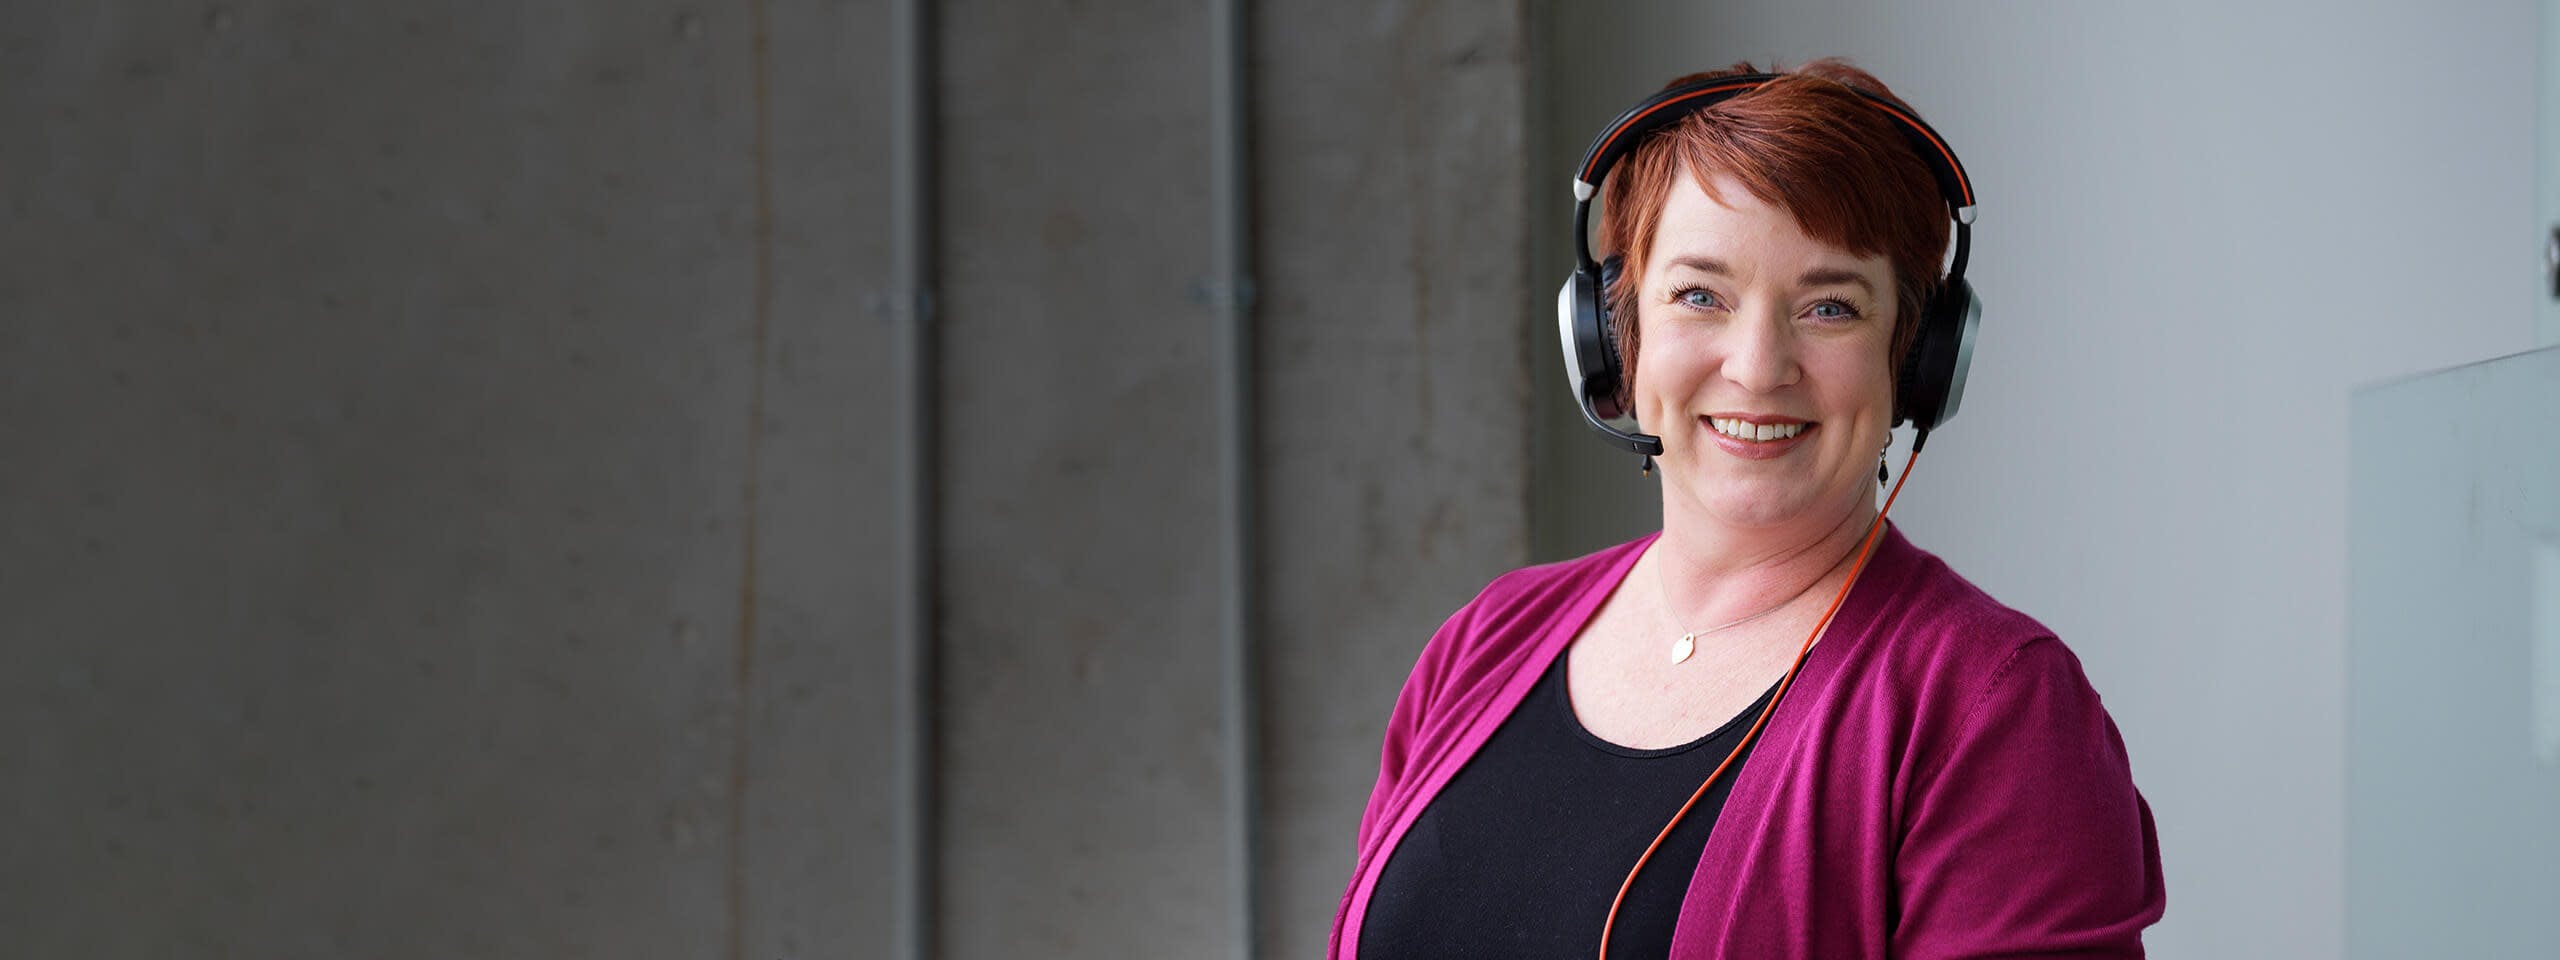 Woman with headphones on smiling to the camera